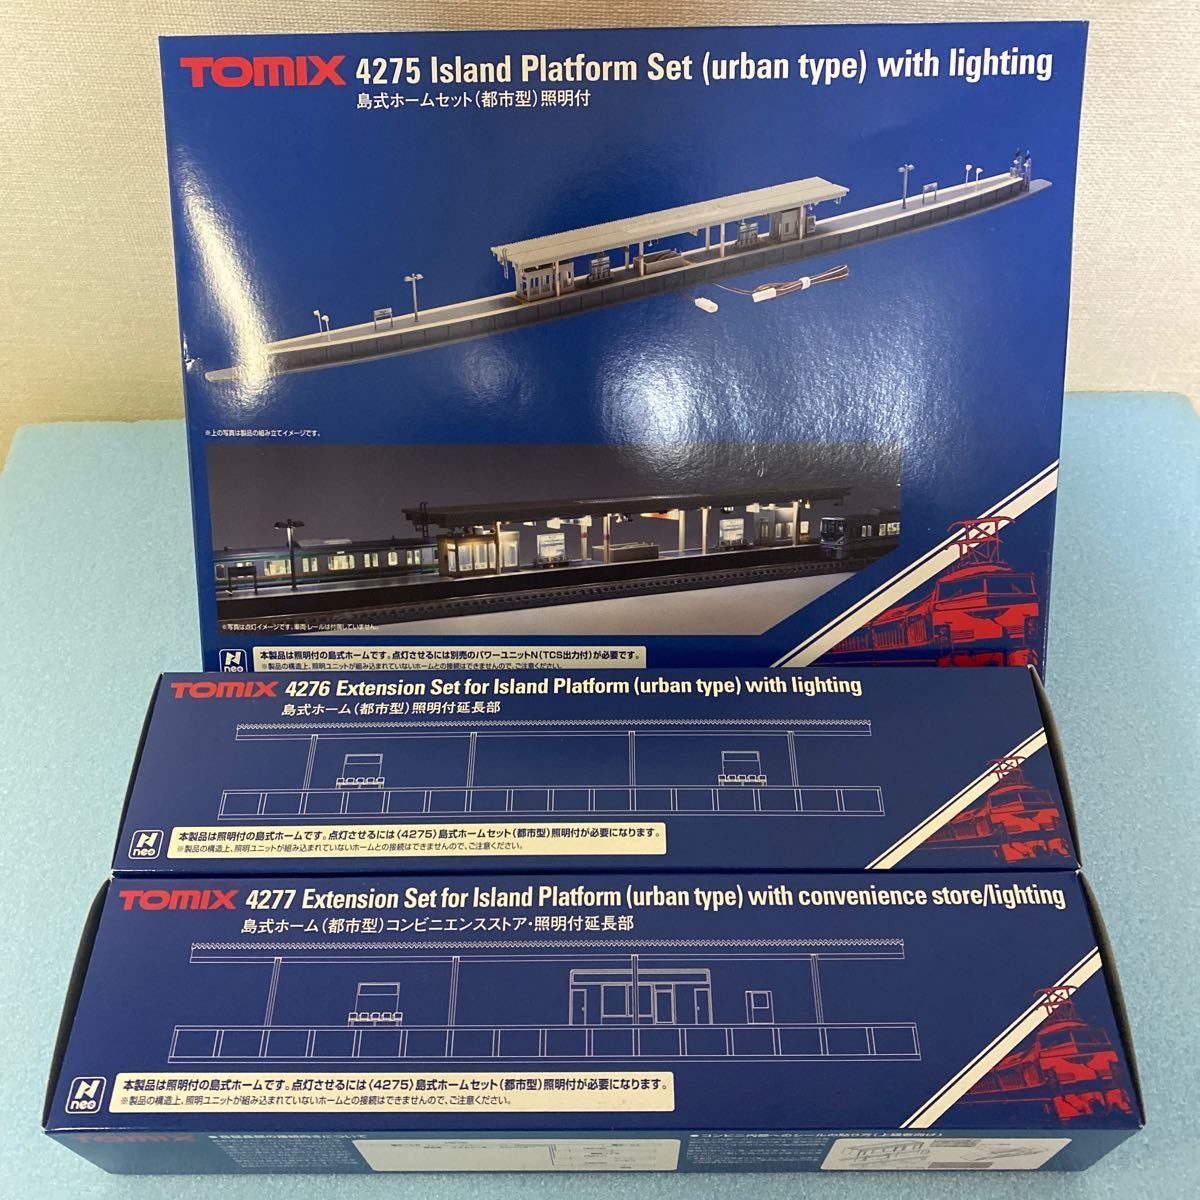 TOMIX 島式ホームセット（都市型）照明付き 4275・4277延長部(コンビニ)・4276延長部　セット【送料無料】_画像2